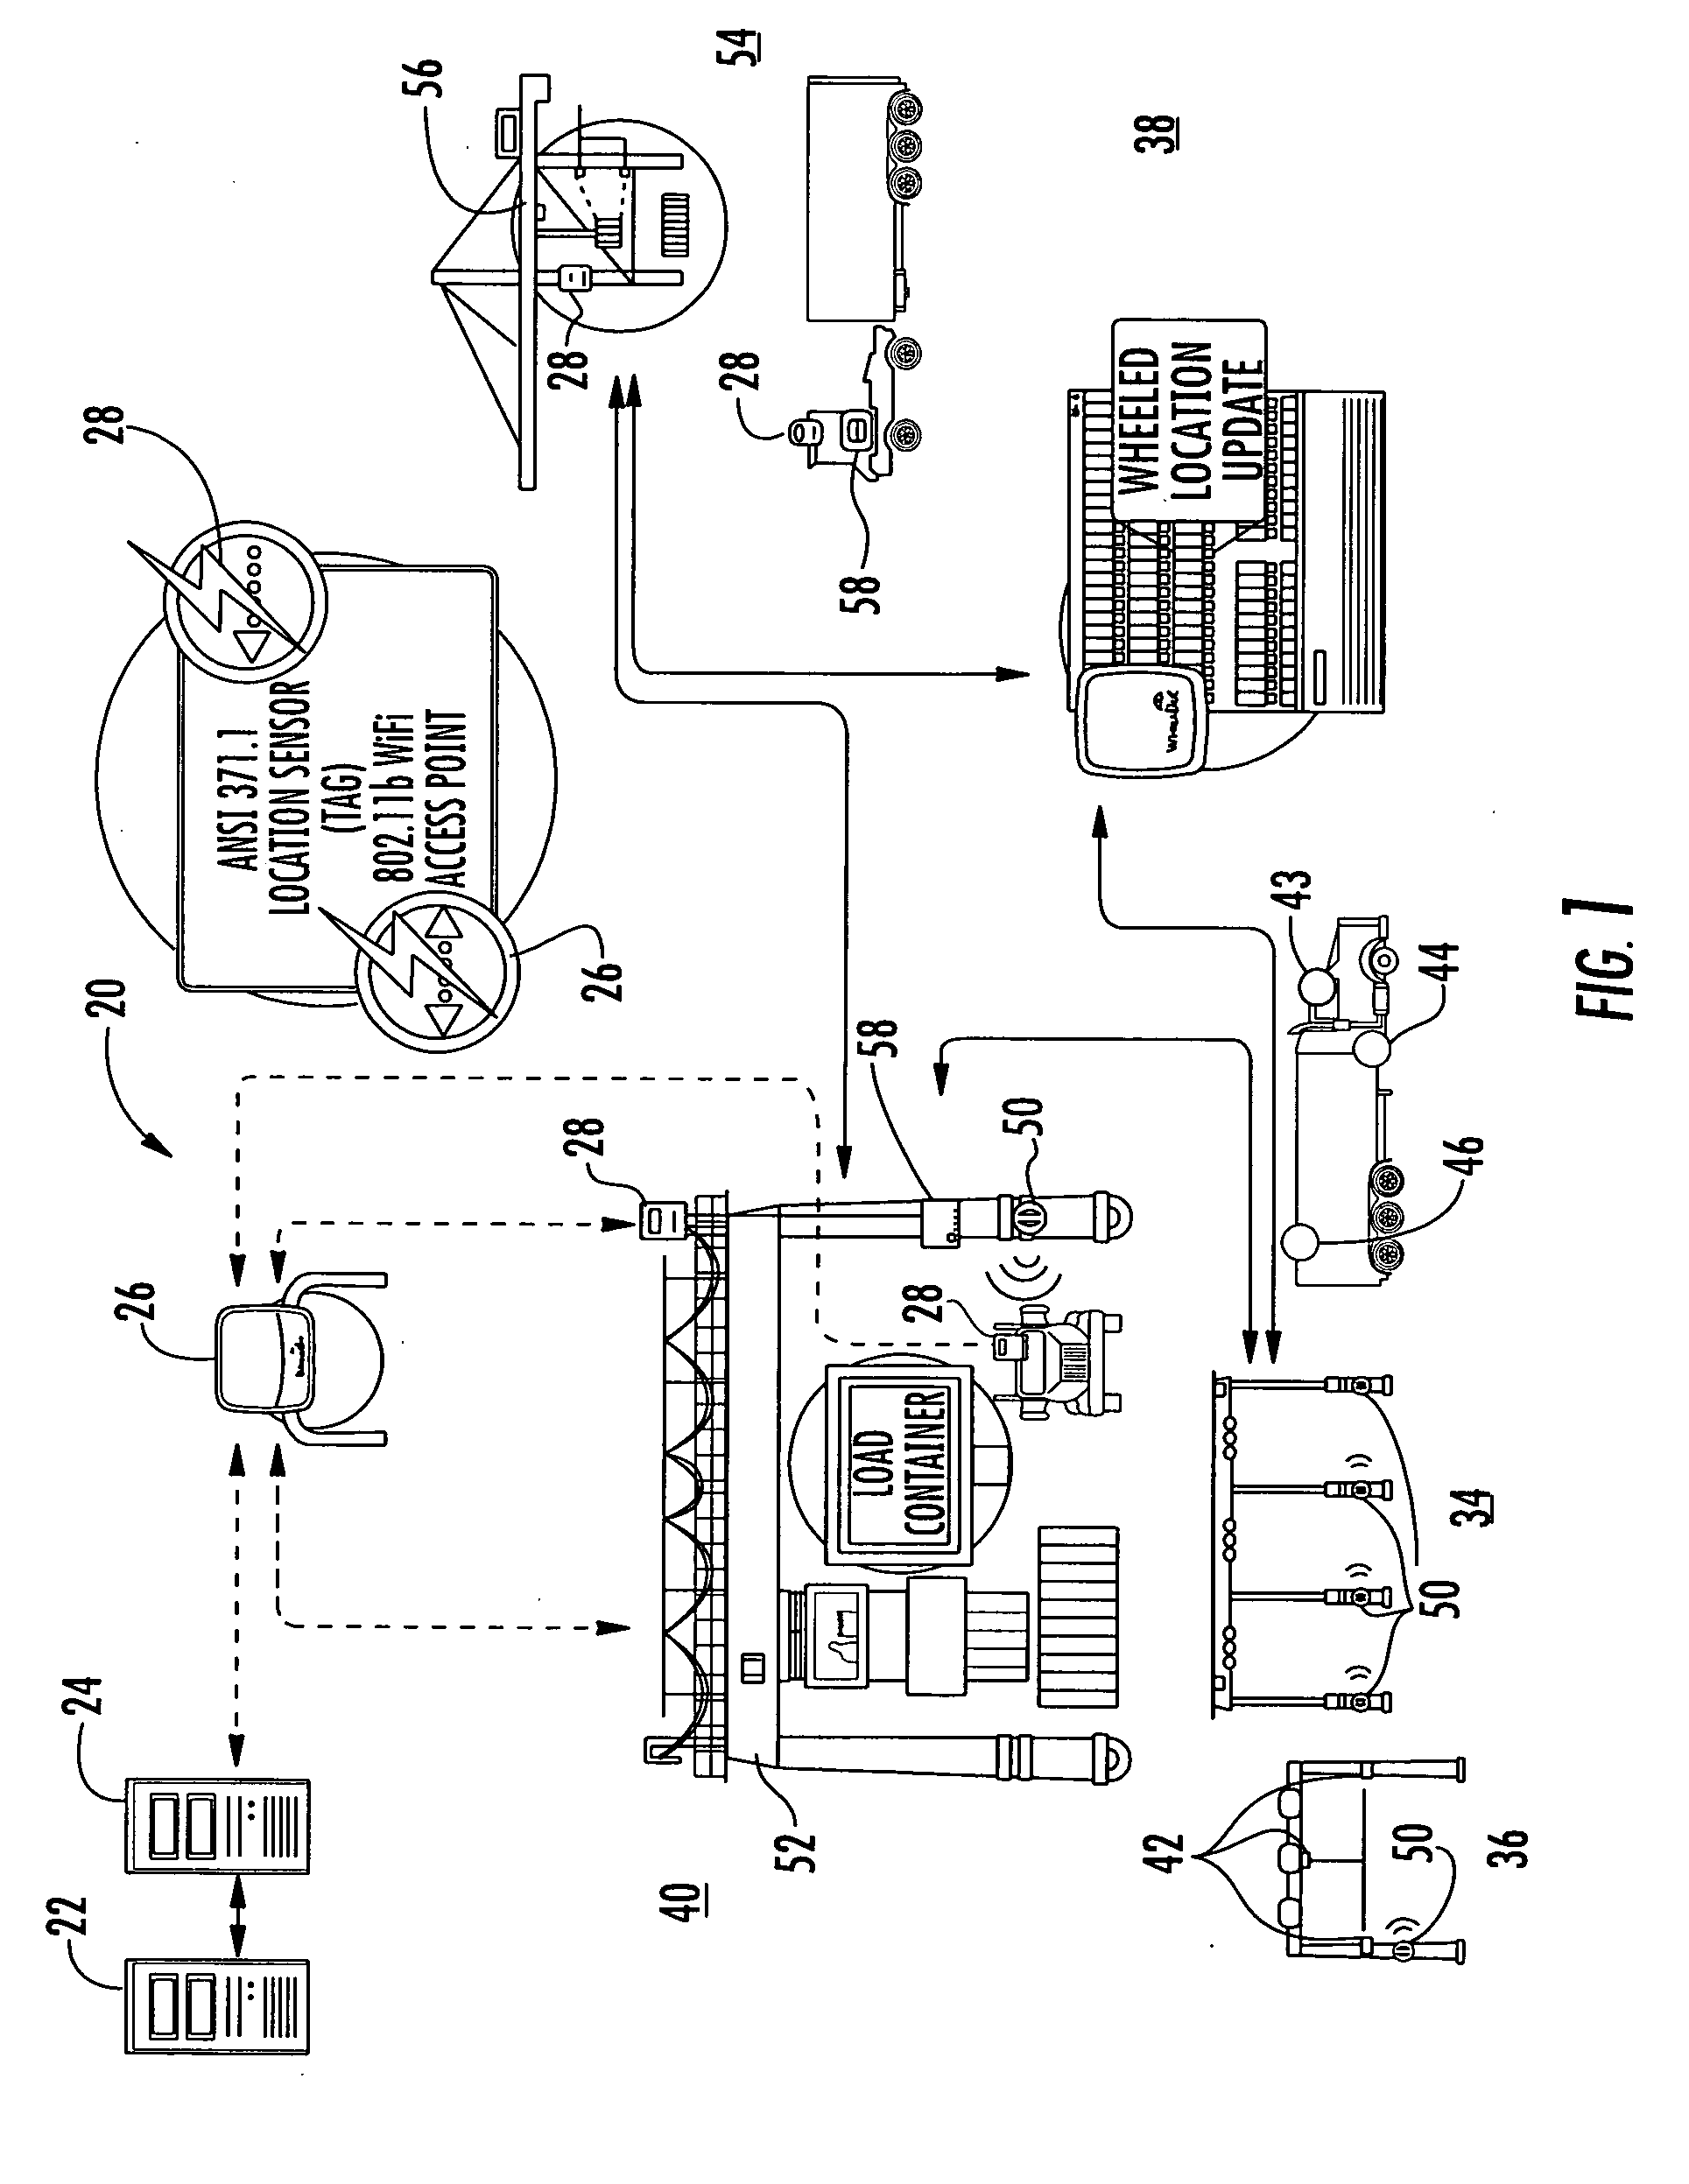 System and method for tracking containers in grounded marine terminal operations